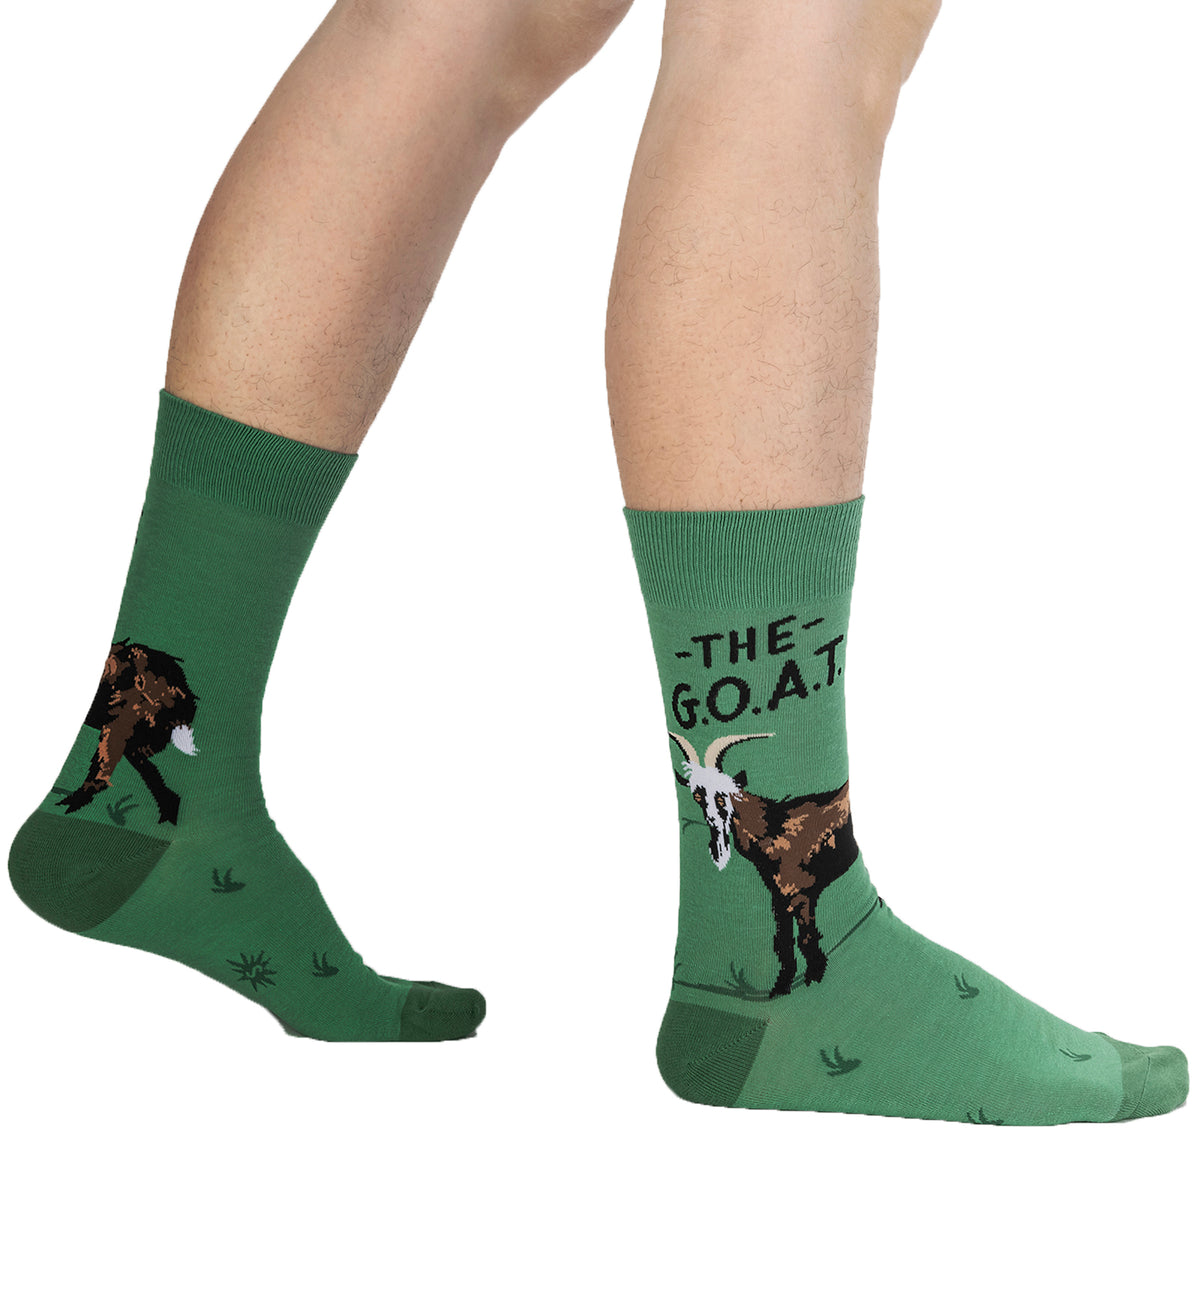 SOCK it to me Men&#39;s Crew Socks (MEF0629),The G.O.A.T. - The G.O.A.T.,One Size